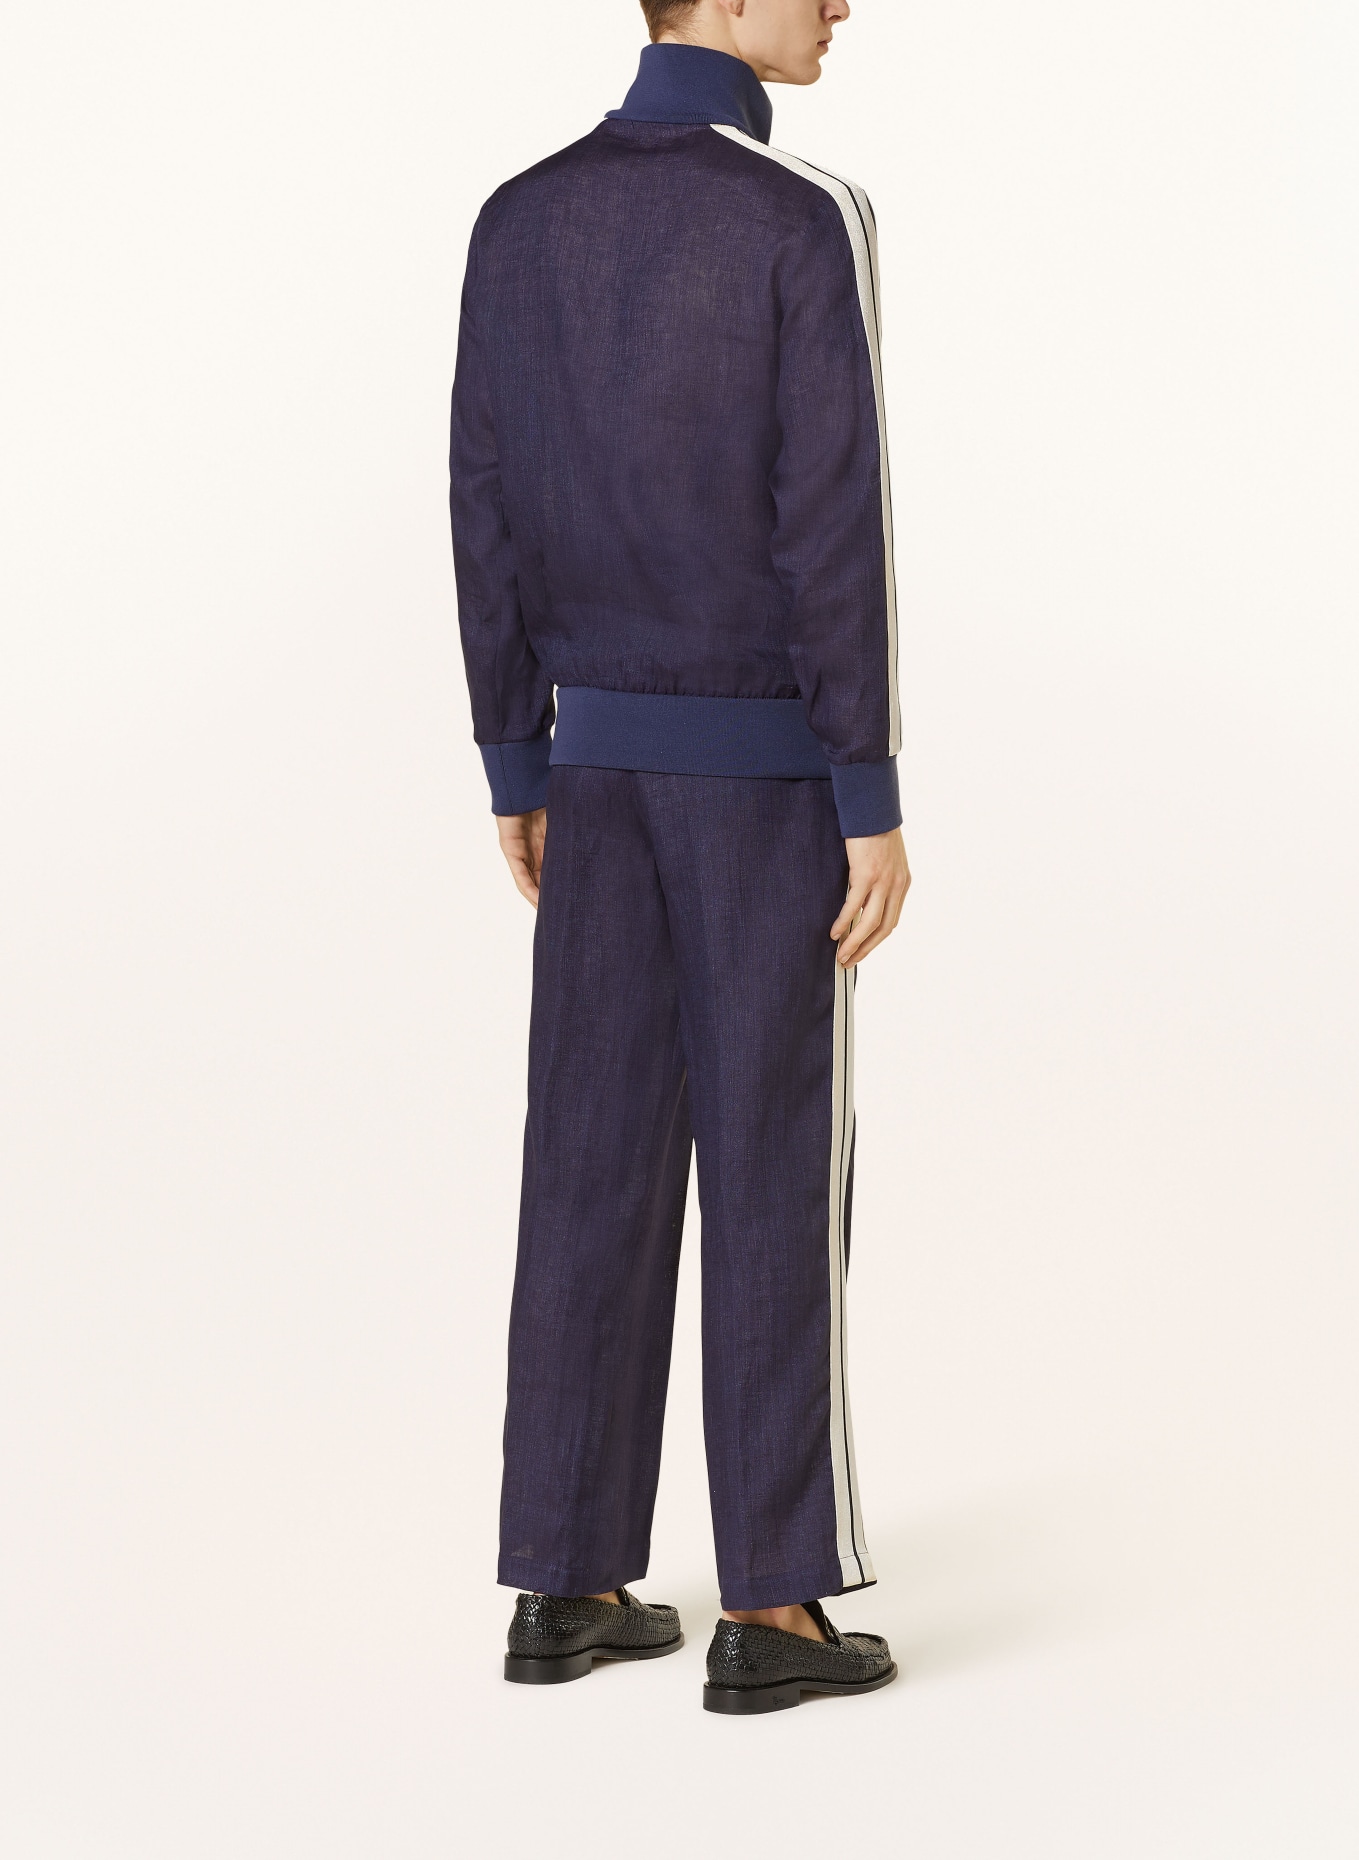 Palm Angels Linen pants in jogger style, Color: DARK BLUE (Image 3)